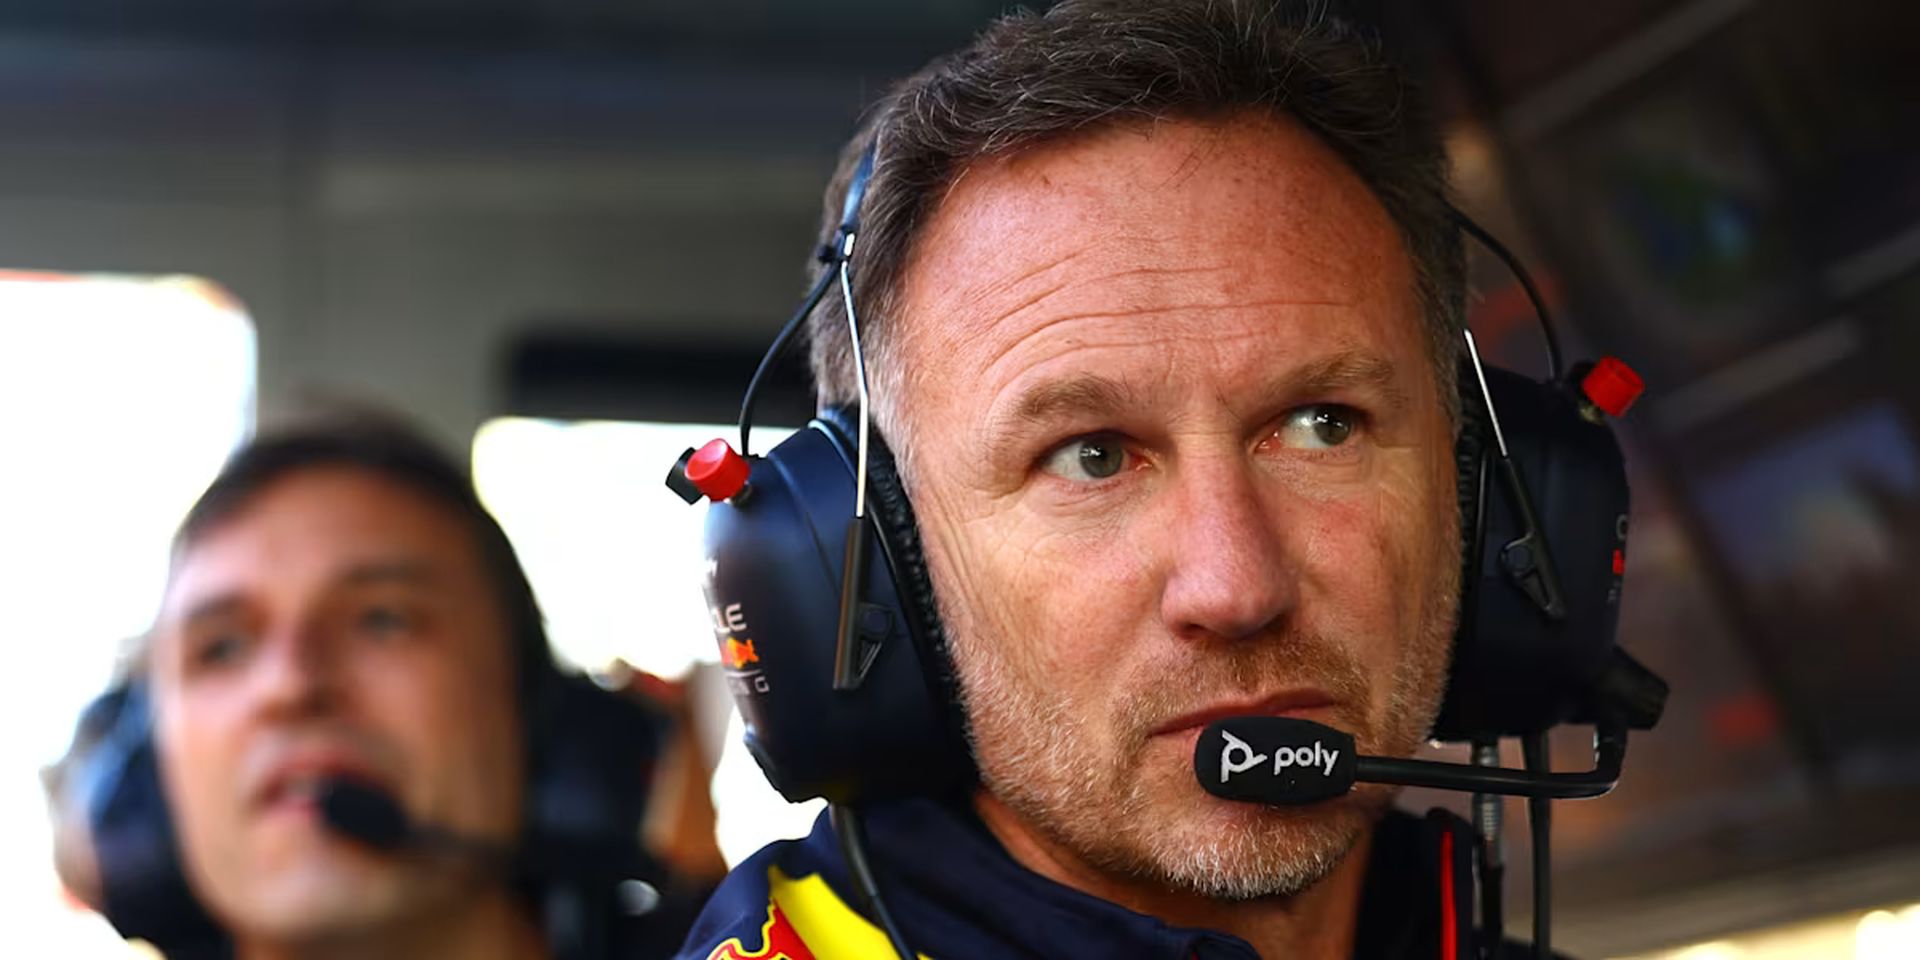 Christian Horner messages leak: Controversy ensues as purported private exchanges spark questions in the F1 world, especially for Red Bull